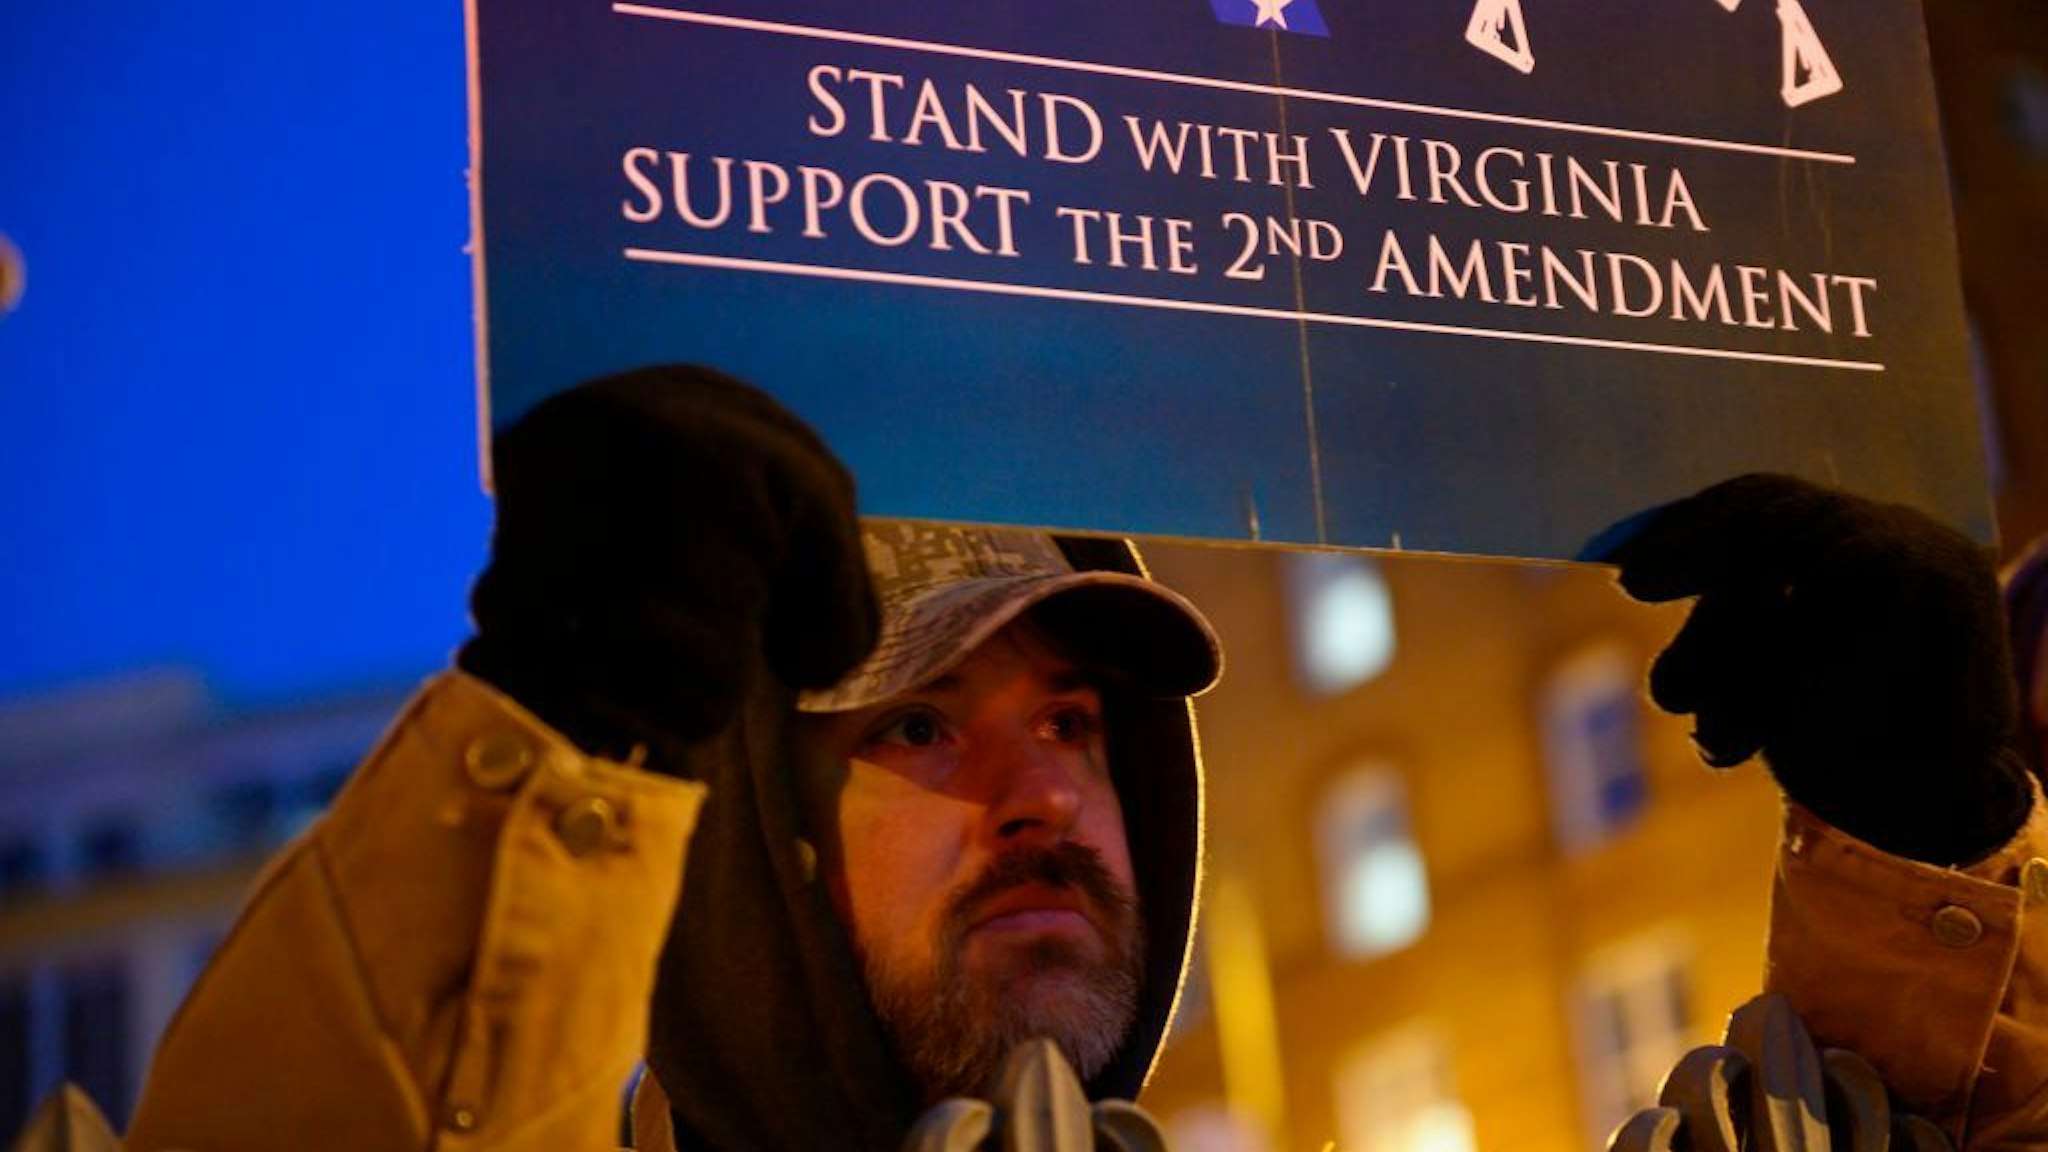 A protestor holds a sign in front of the Virginia State Capitol building in Richmond, Virginia on January 20, 2020. - Thousands of gun rights supporters descended for a rally in the grounds of the State Capitol under heavy surveillance after authorities were forced to declare a state of emergency for fear of violence by far-right groups. (Photo by Roberto SCHMIDT / AFP)